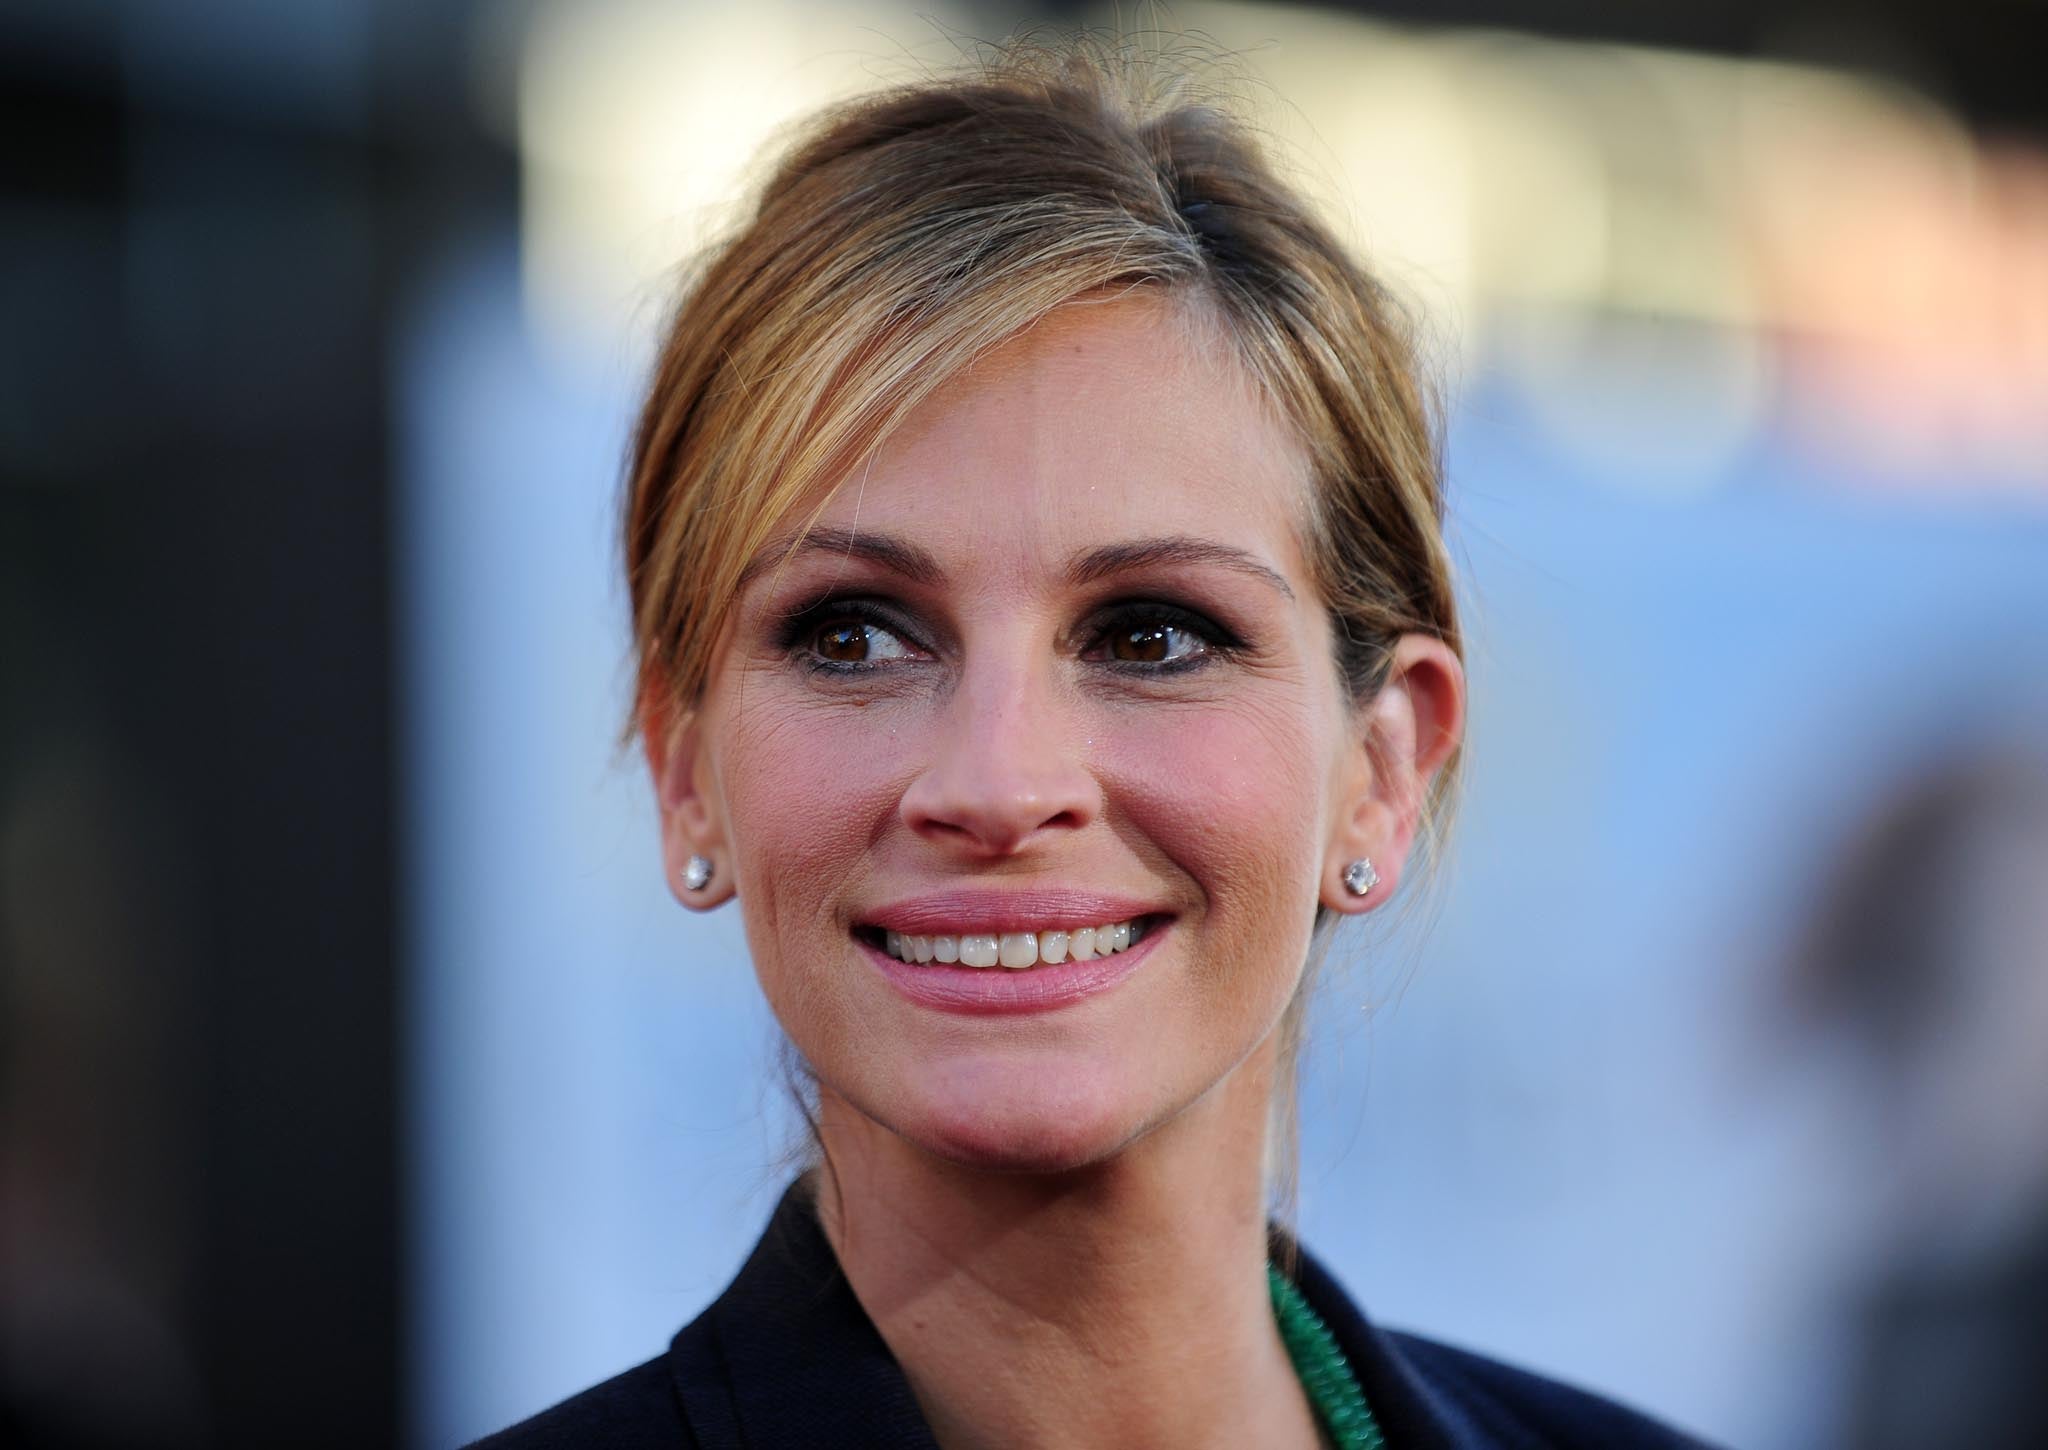 Julia Roberts was asked to remove two freckles for a movie role